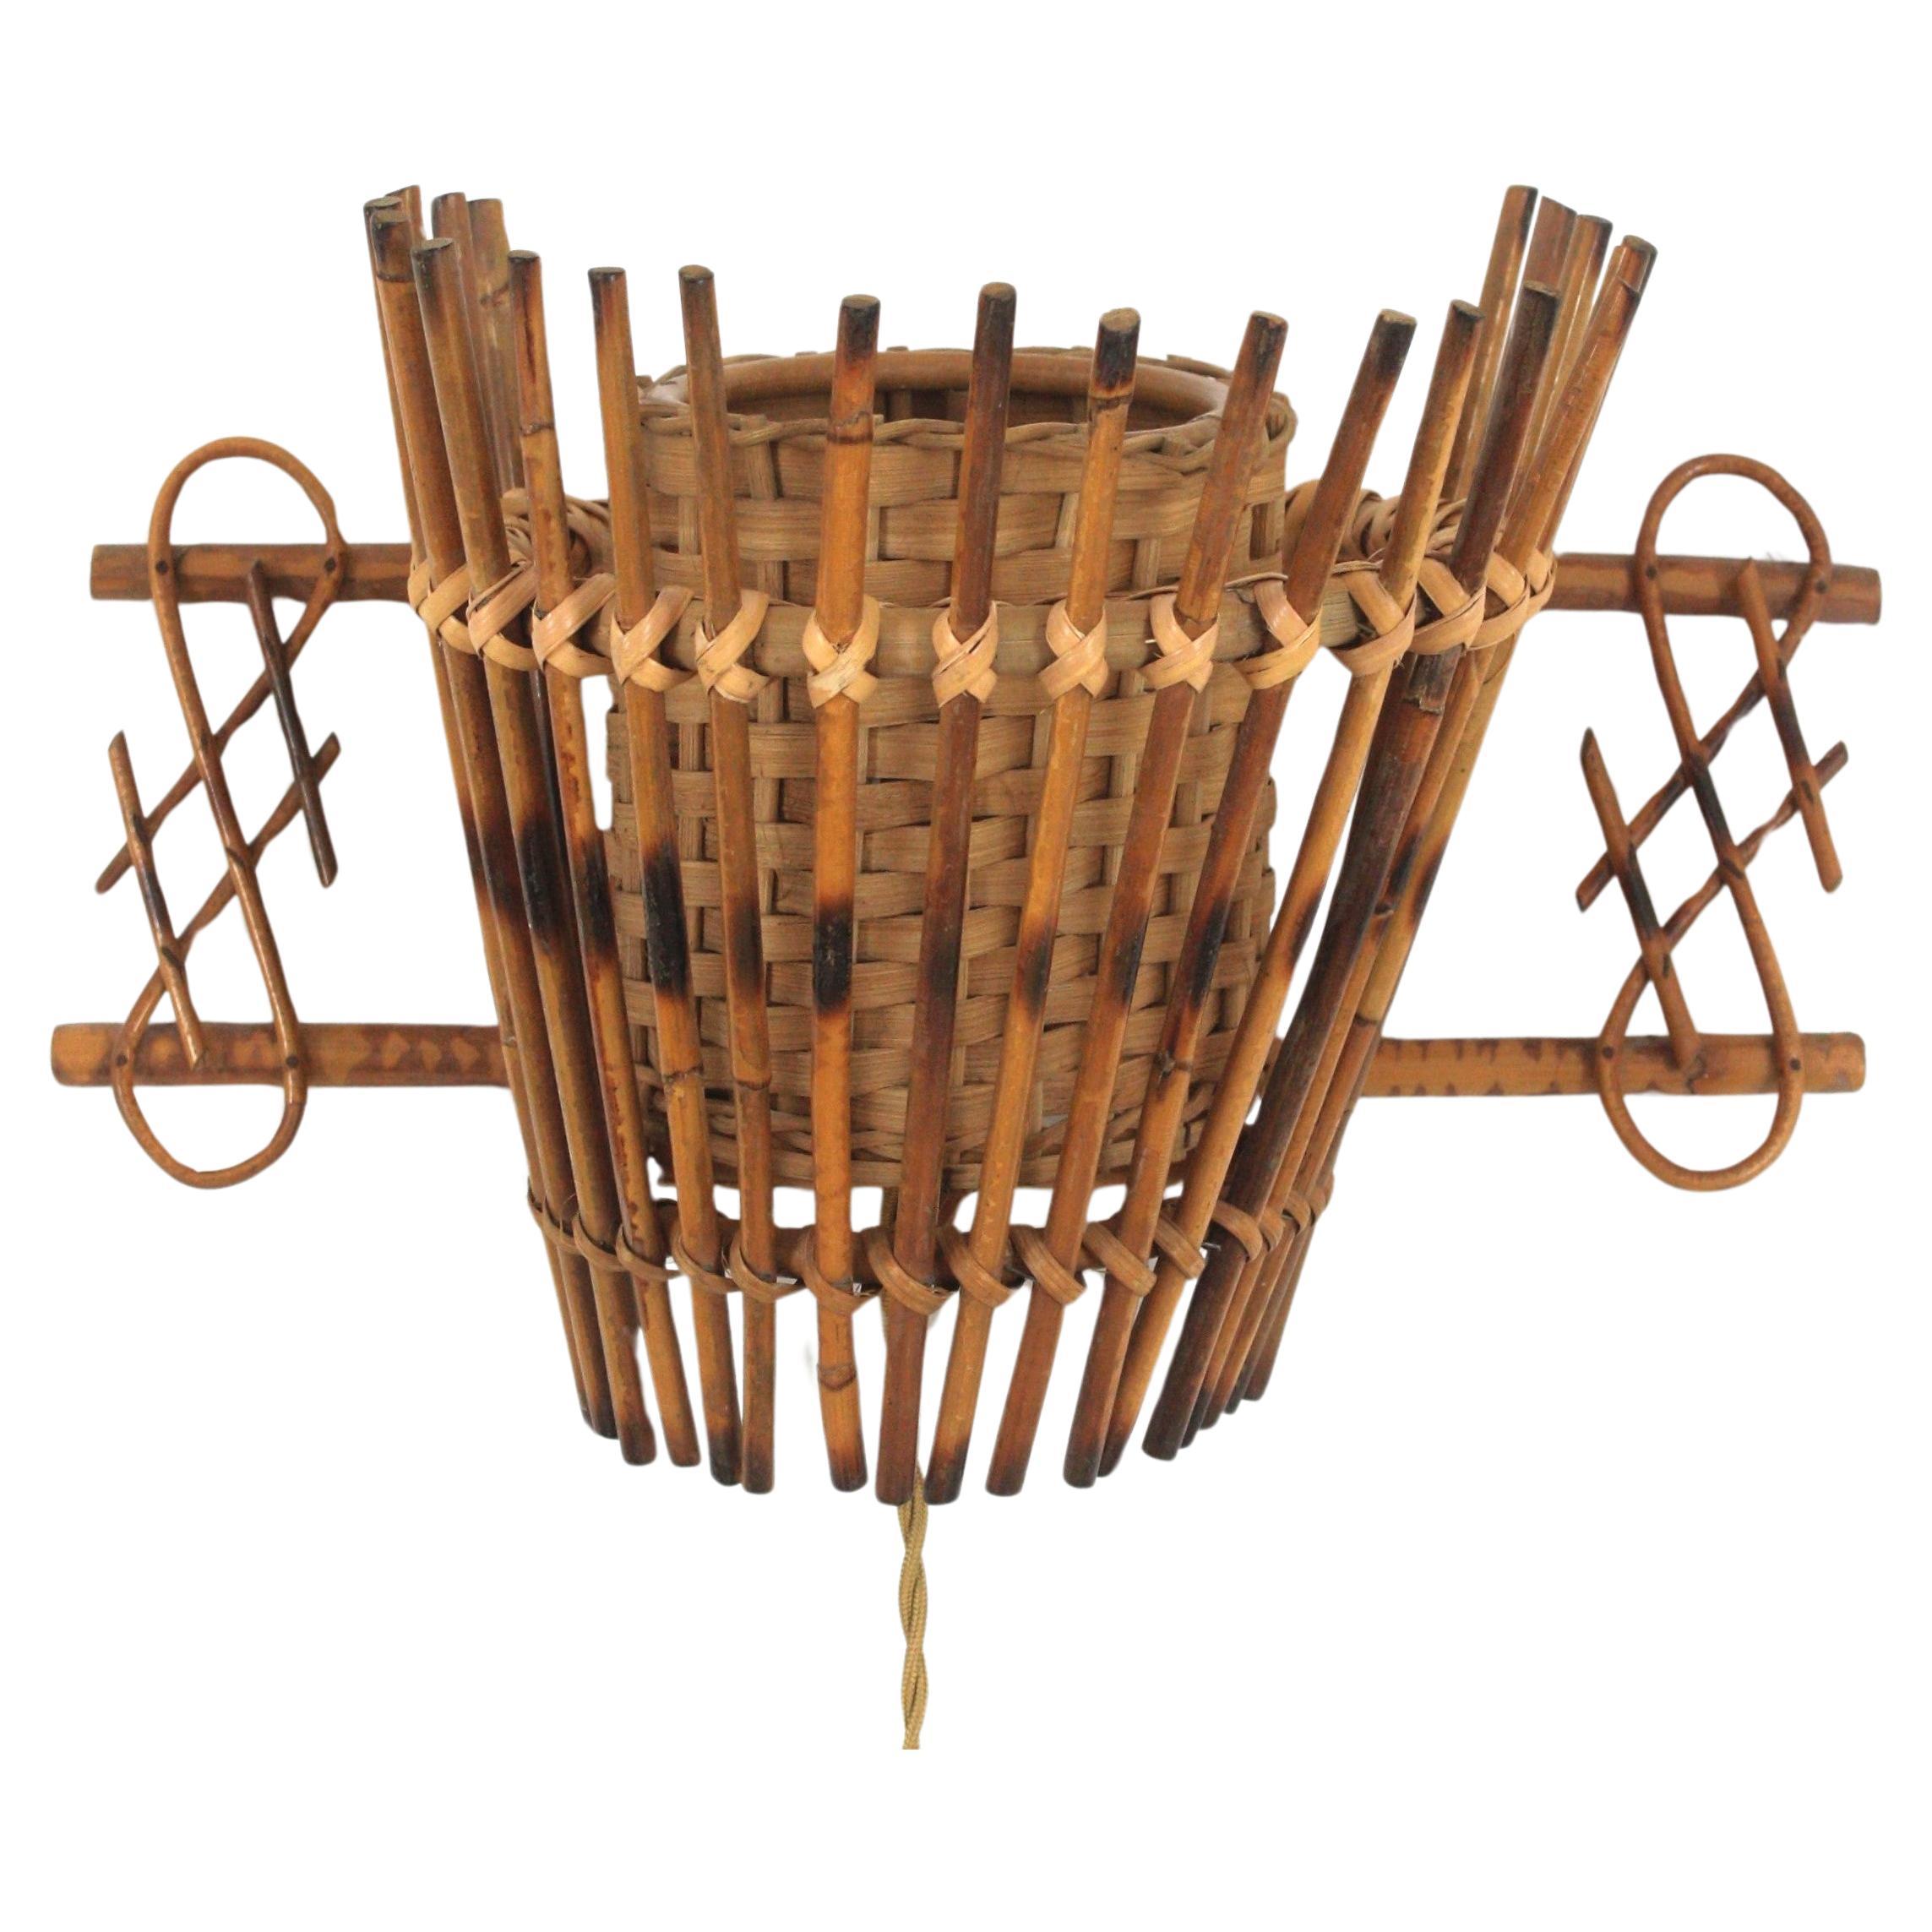 Midcentury Rattan & Wicker Conical Wall Light, 1950s